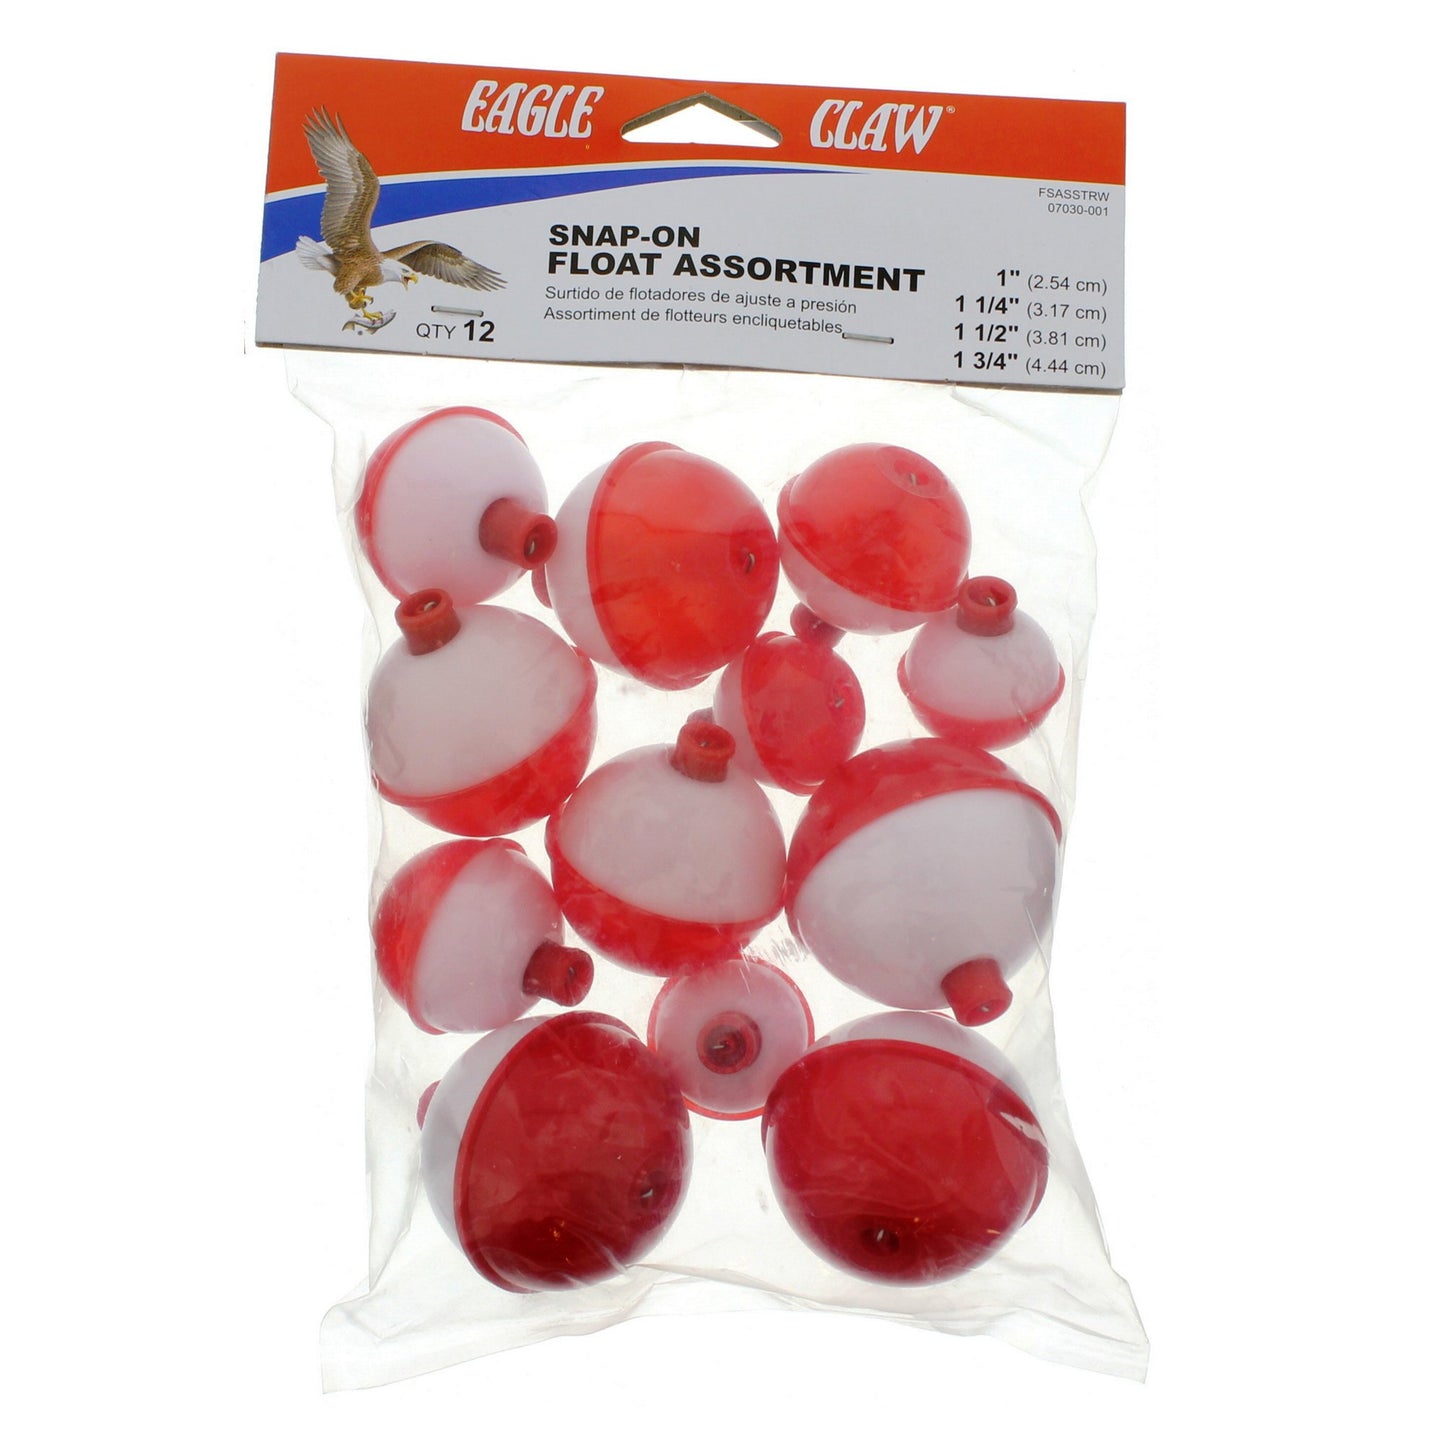 Eagle Claw Snap-On Bobber/Floats Assortment, 12 Piece